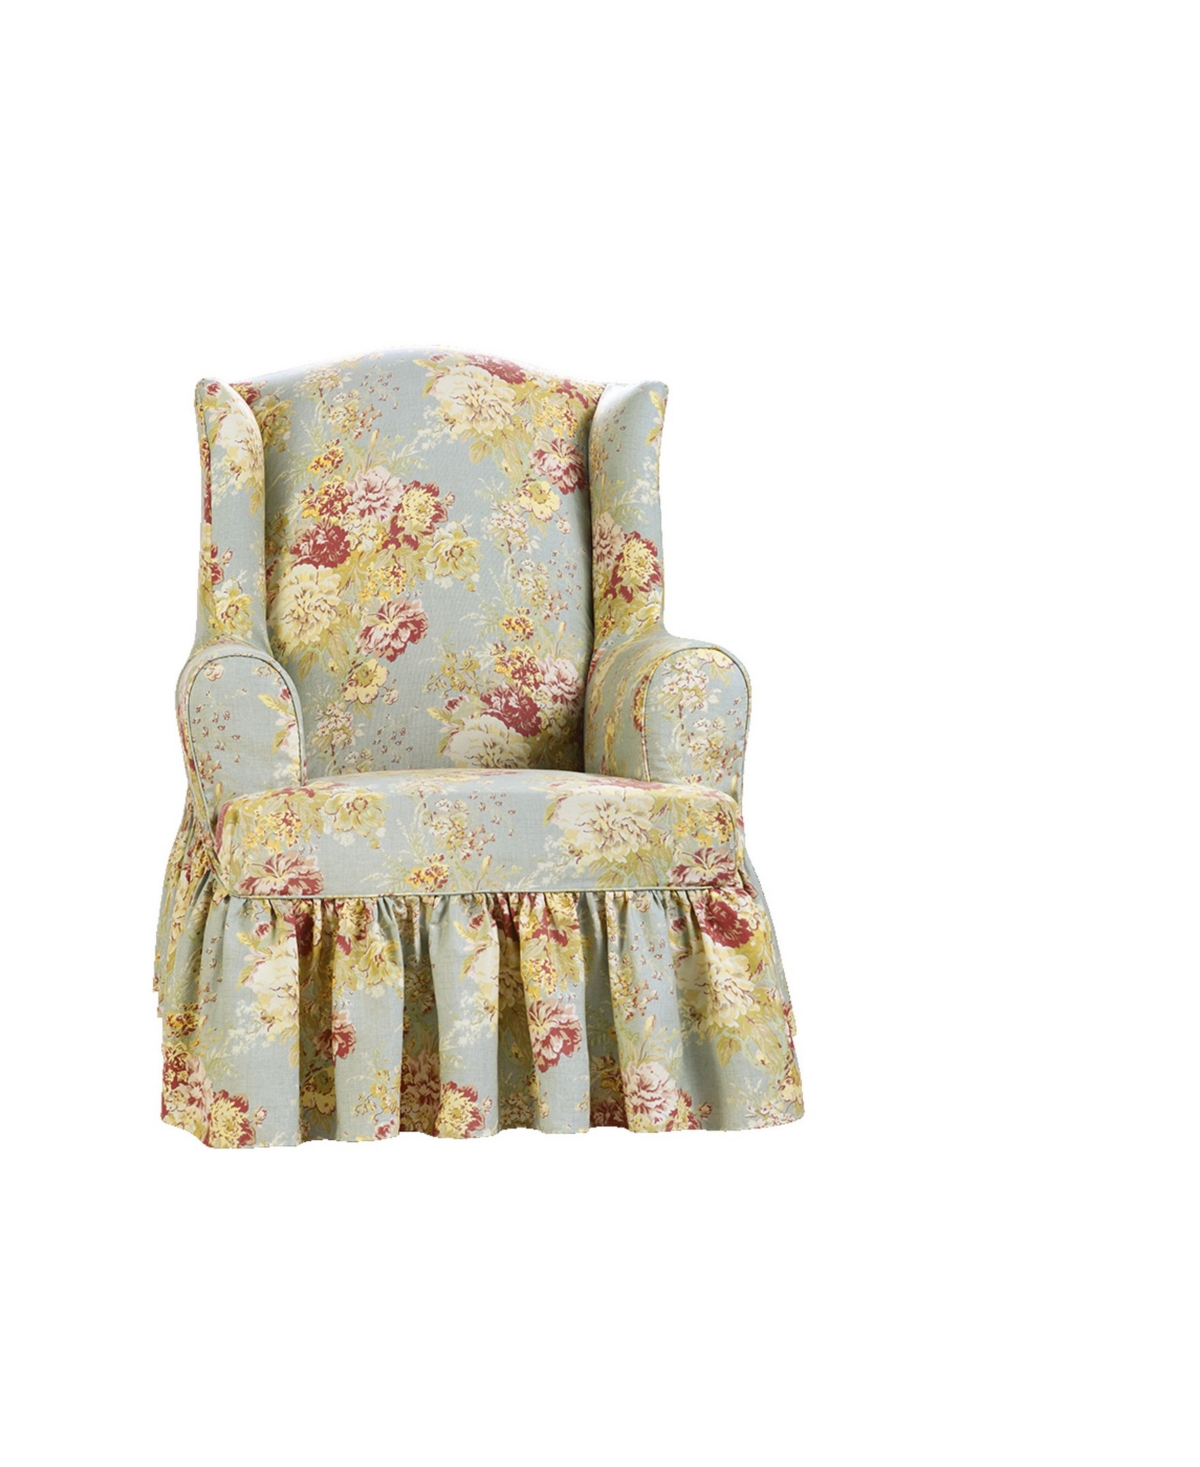 Waverly Ballad Bouquet Wing Chair Slipcover, 45" X 32" In Robin's Egg